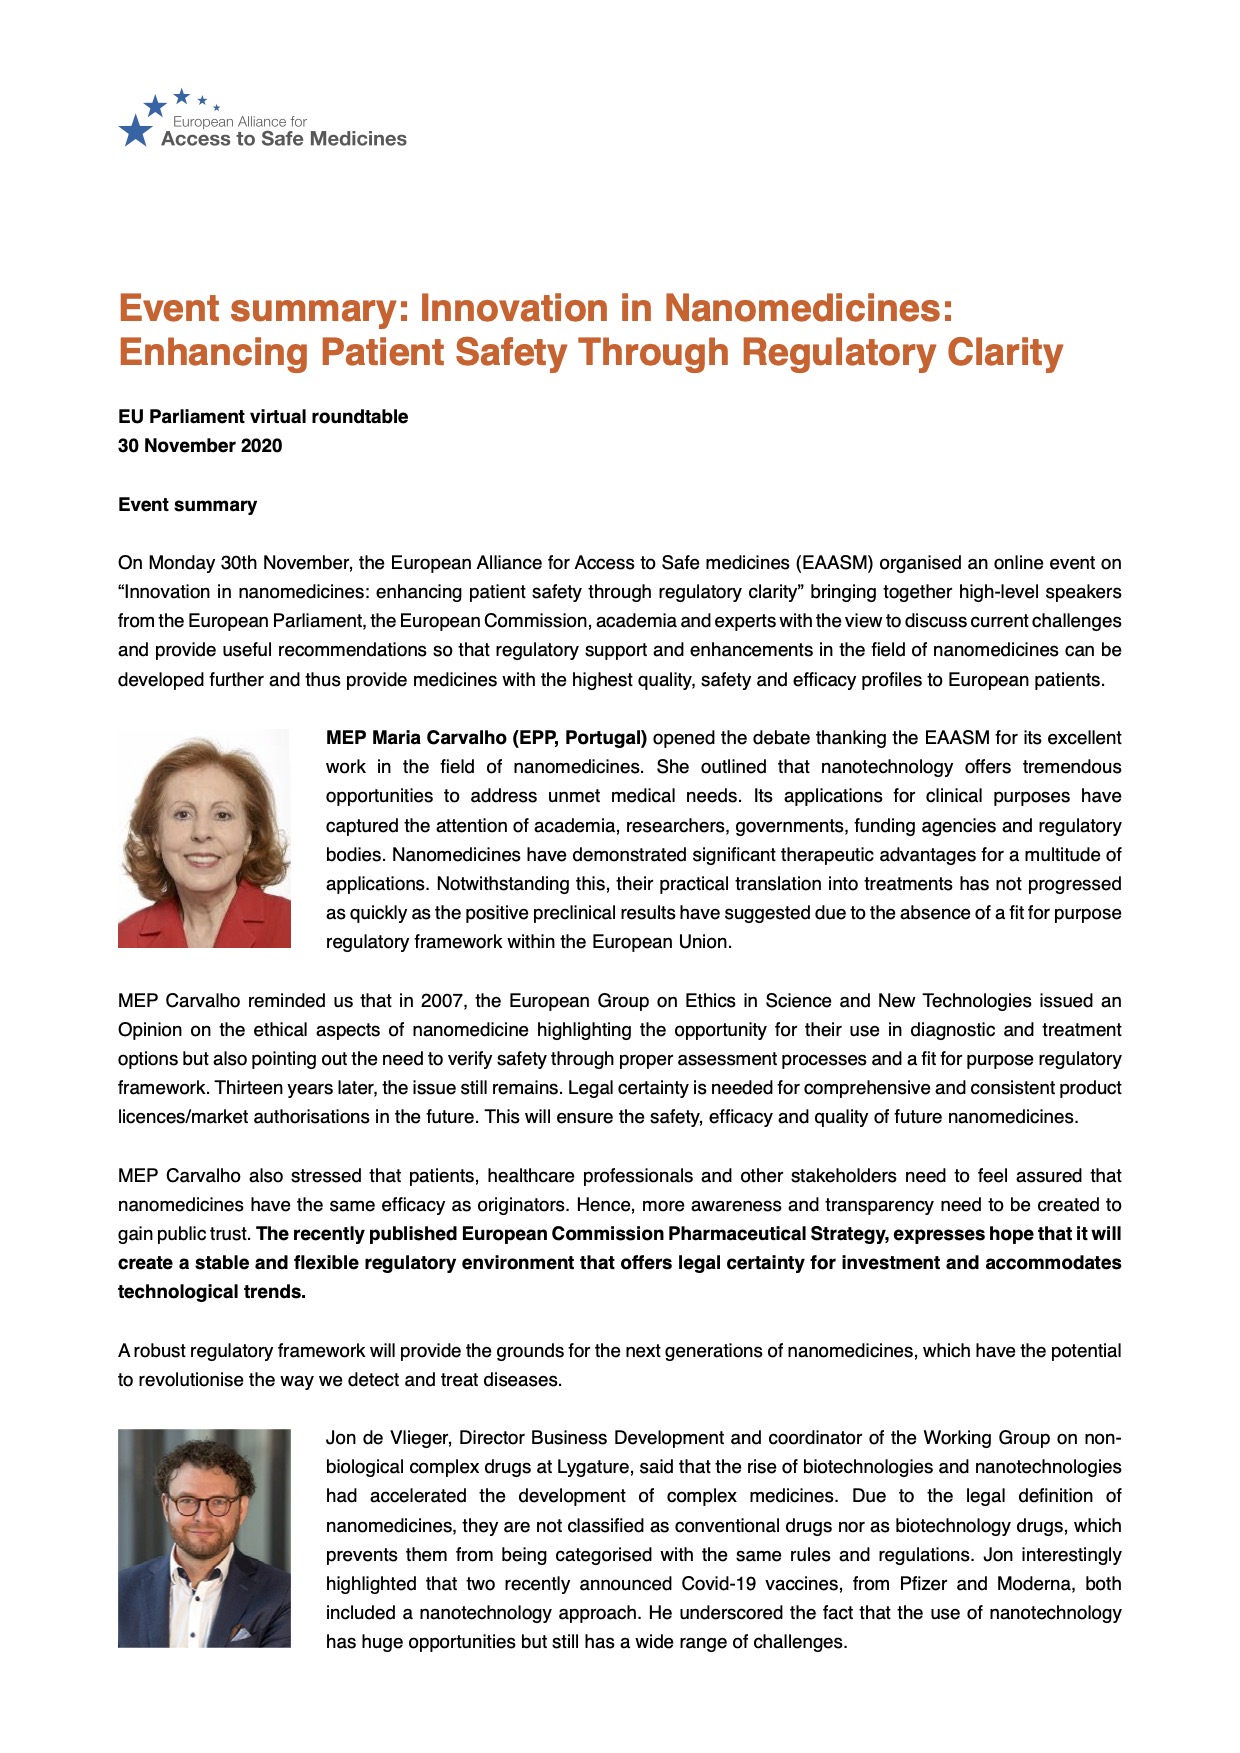 Event summary: Innovation in Nanomedicines: Enhancing Patient Safety Through Regulatory Clarity